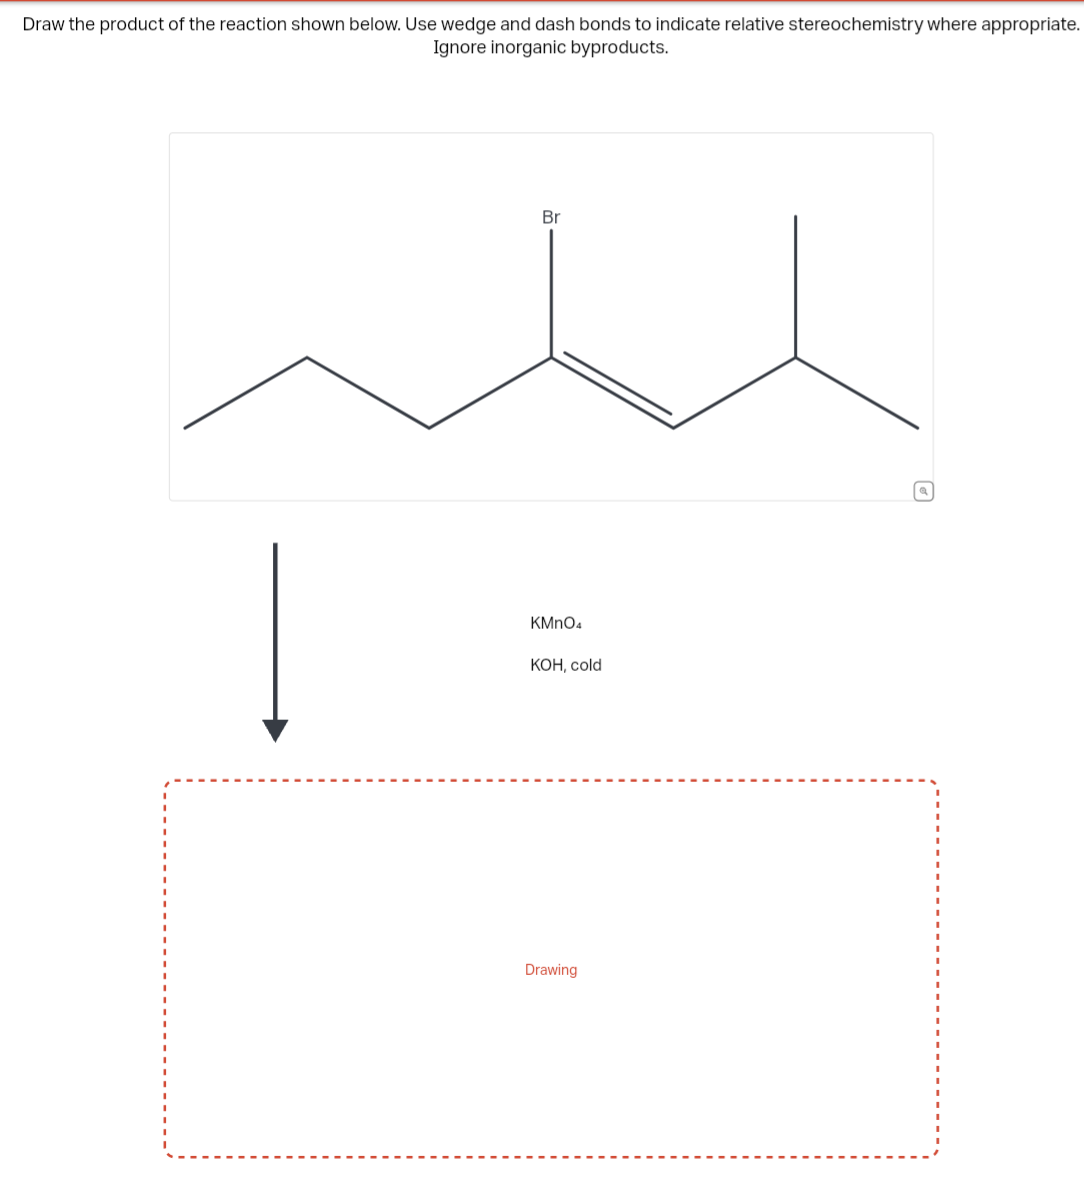 Draw the product of the reaction shown below. Use wedge and dash bonds to indicate relative stereochemistry where appropriate.
Ignore inorganic byproducts.
Br
KMnO4
KOH, cold
Drawing